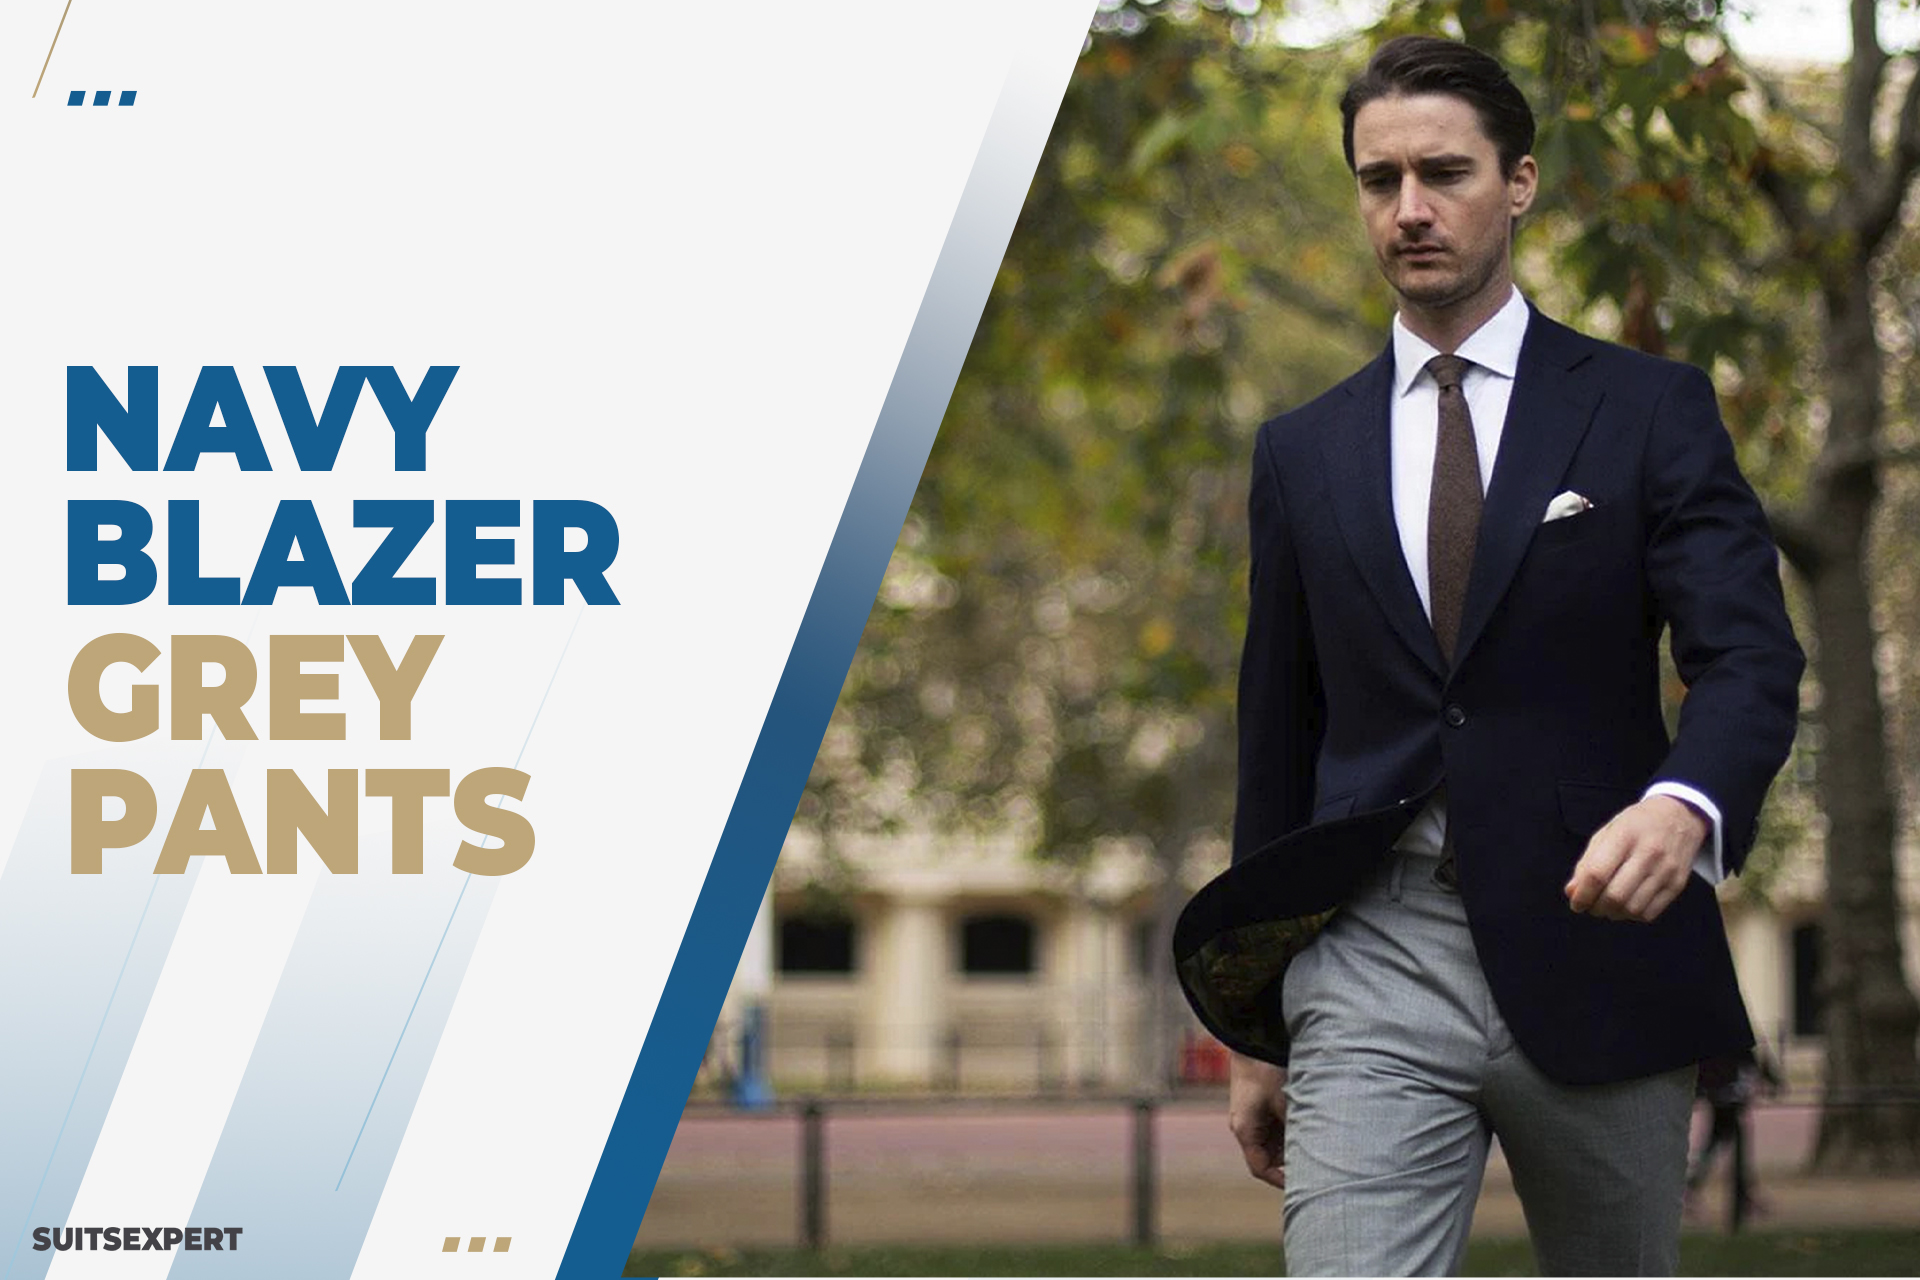 navy blazer and grey pants outfits cover